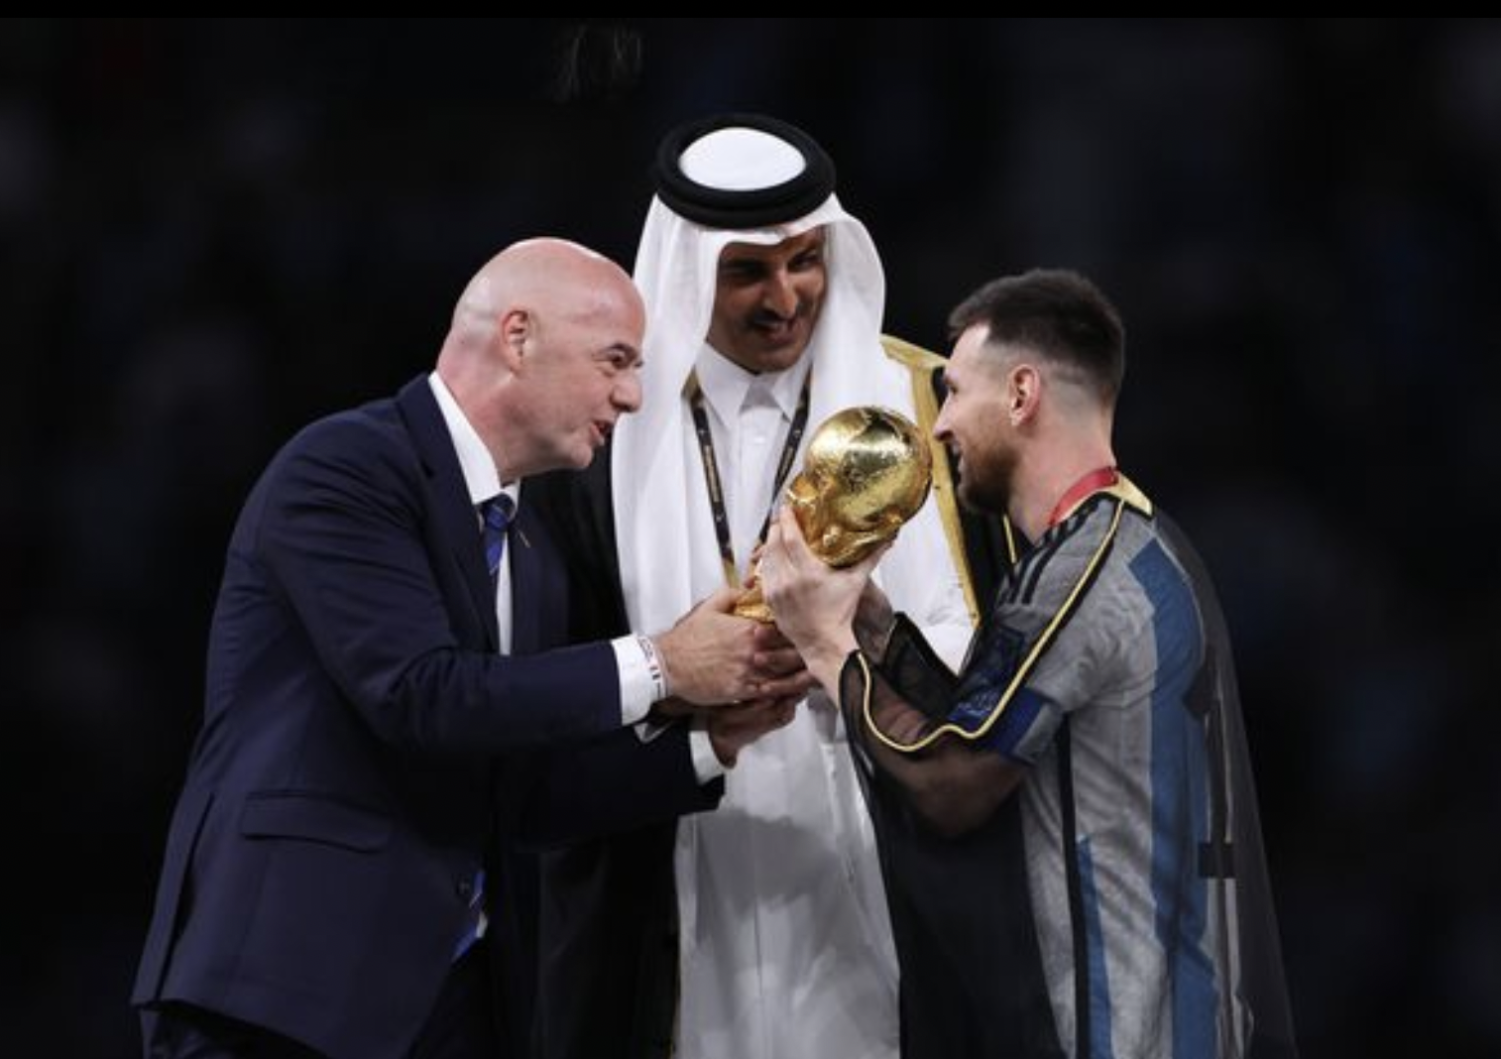 Official Qatar 2022 poster captures Arab passion and culture - Inside World  Football